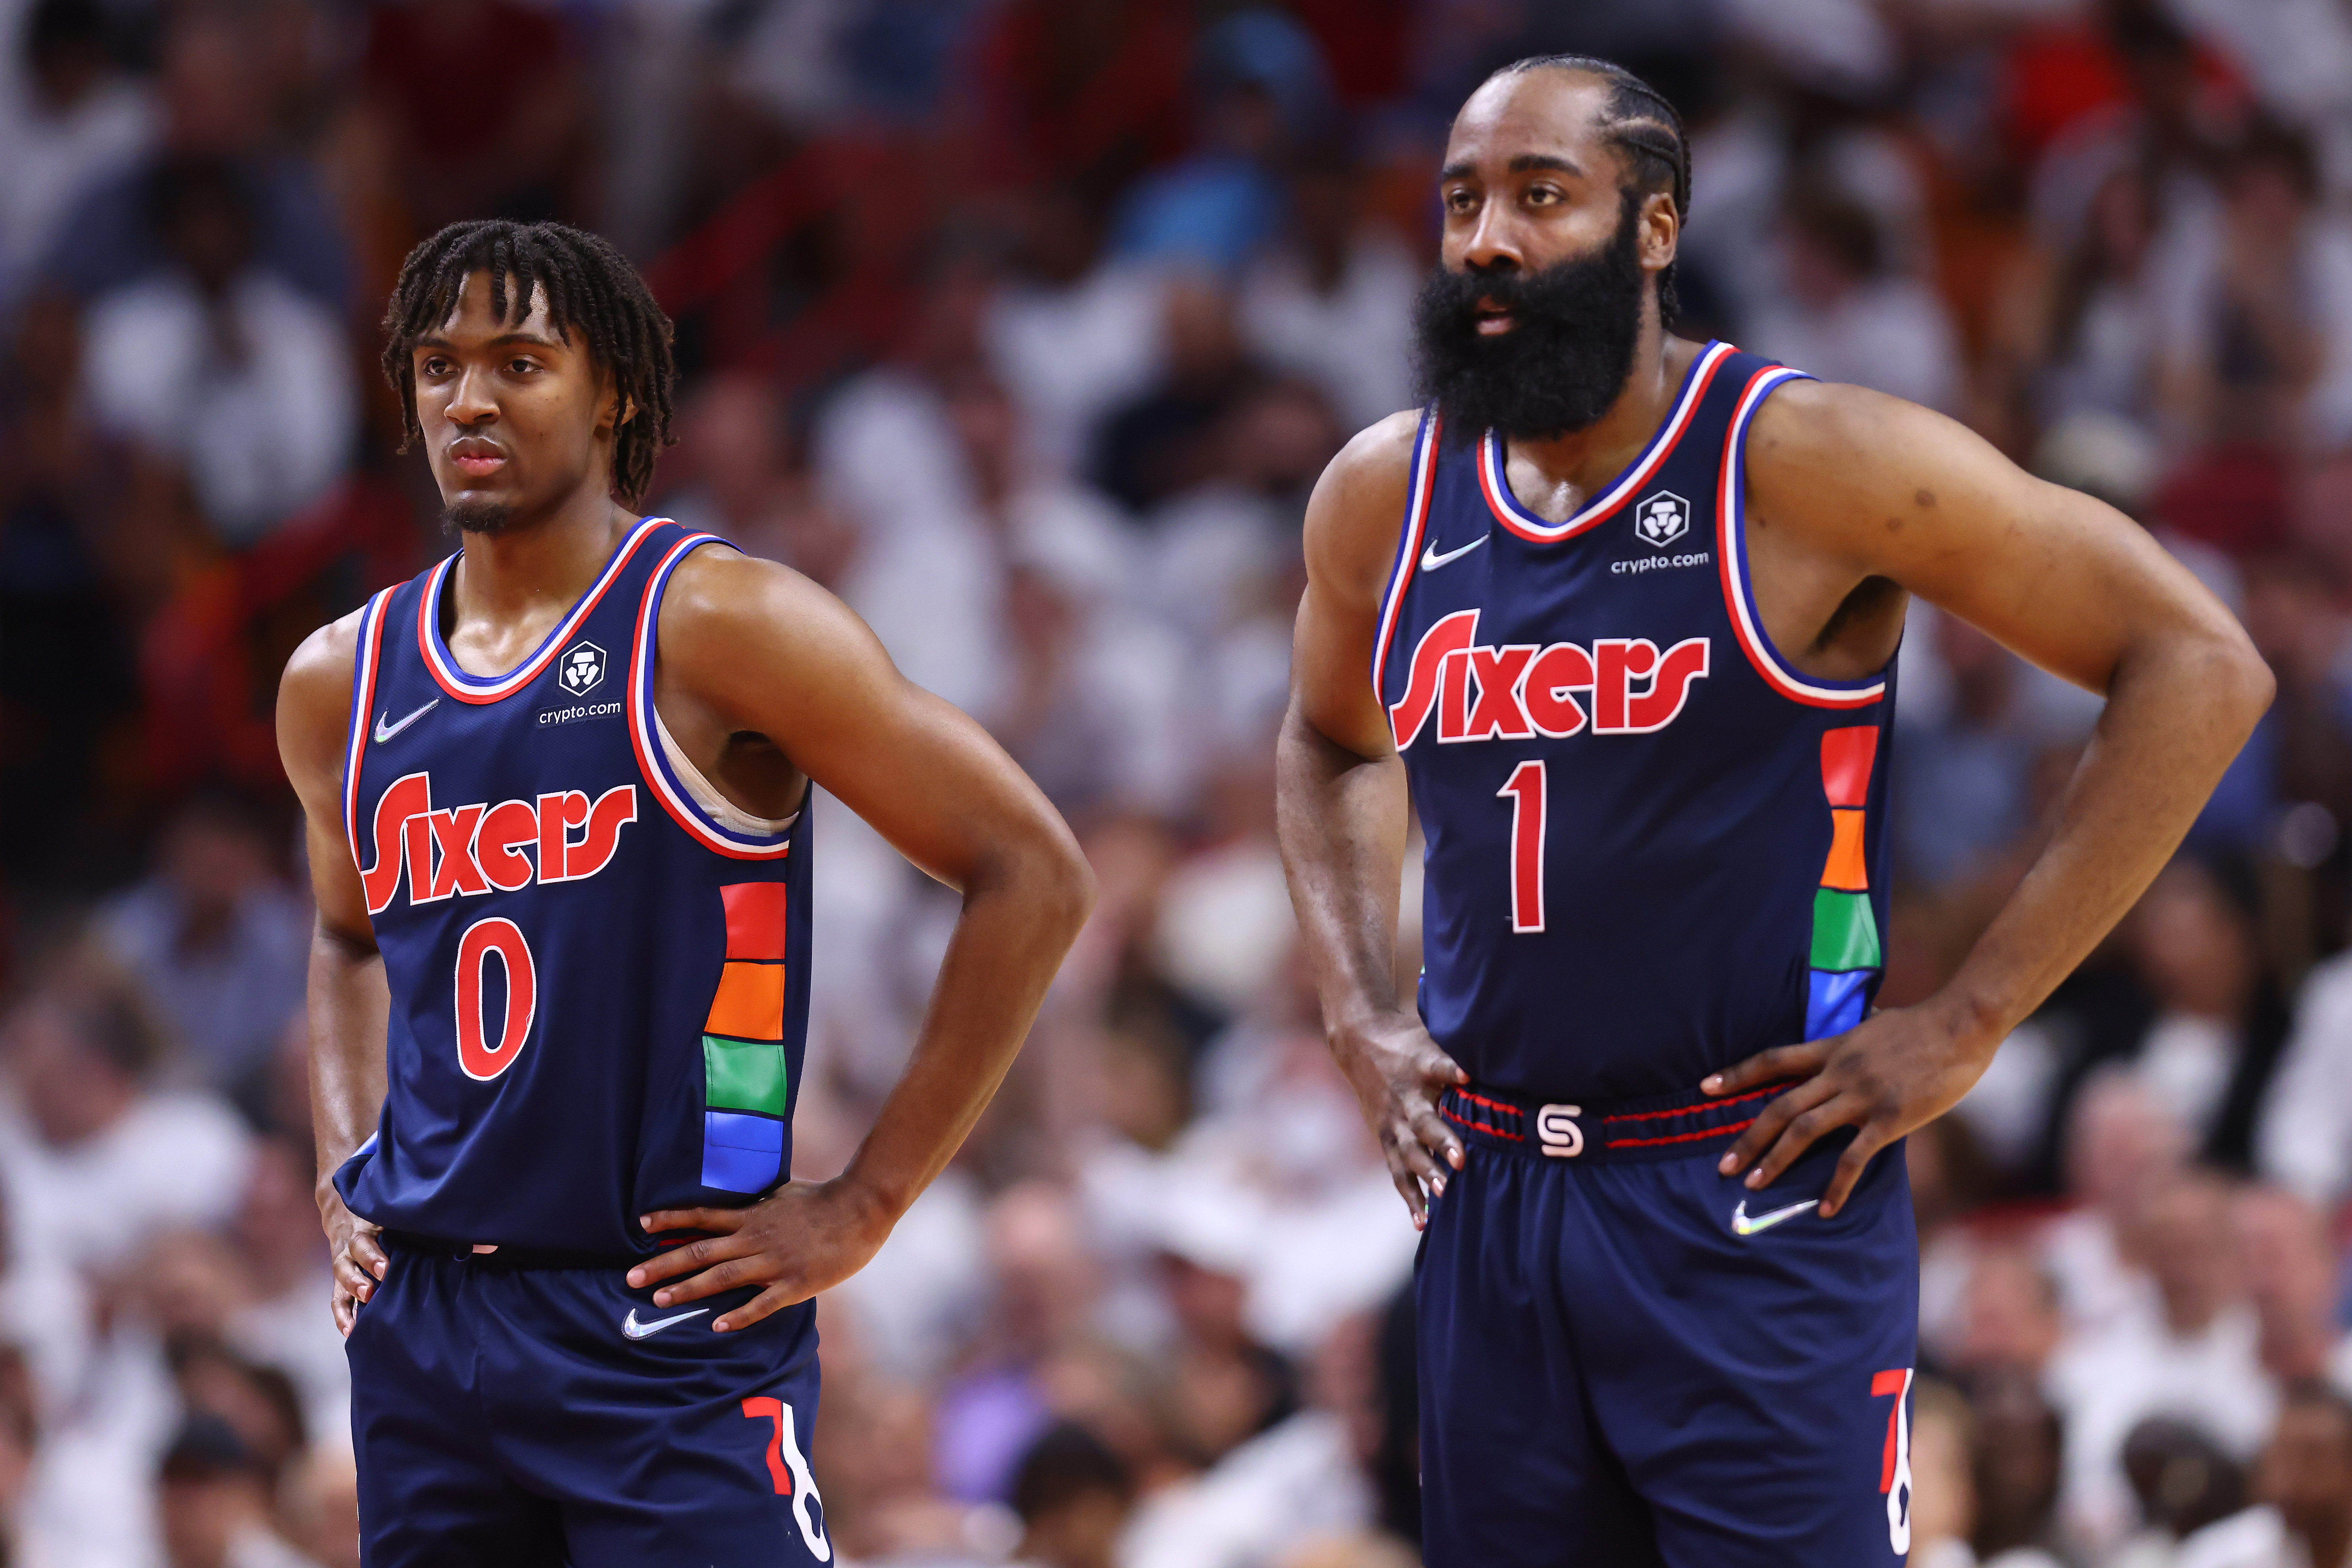 Sixers trade for James Harden can't include Tyrese Maxey